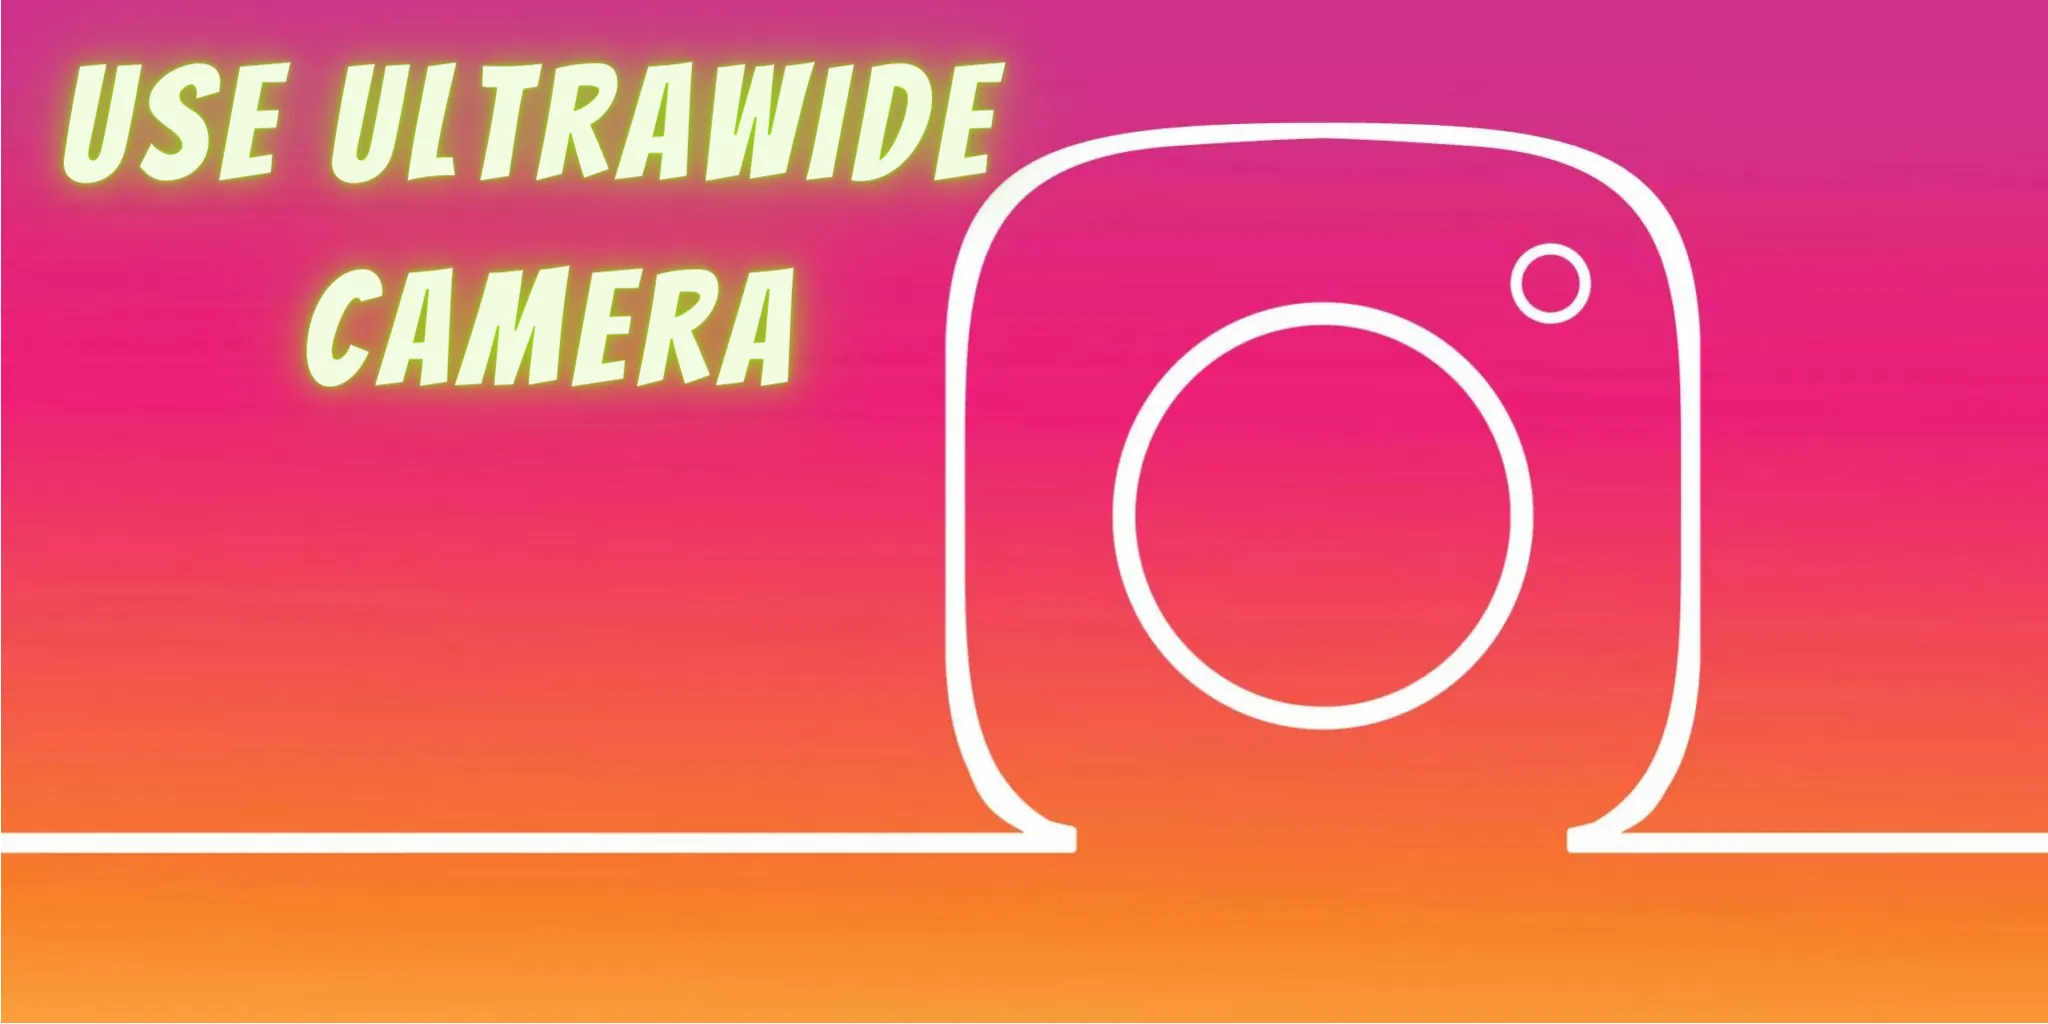 How To Use Ultrawide Camera On Instagram?